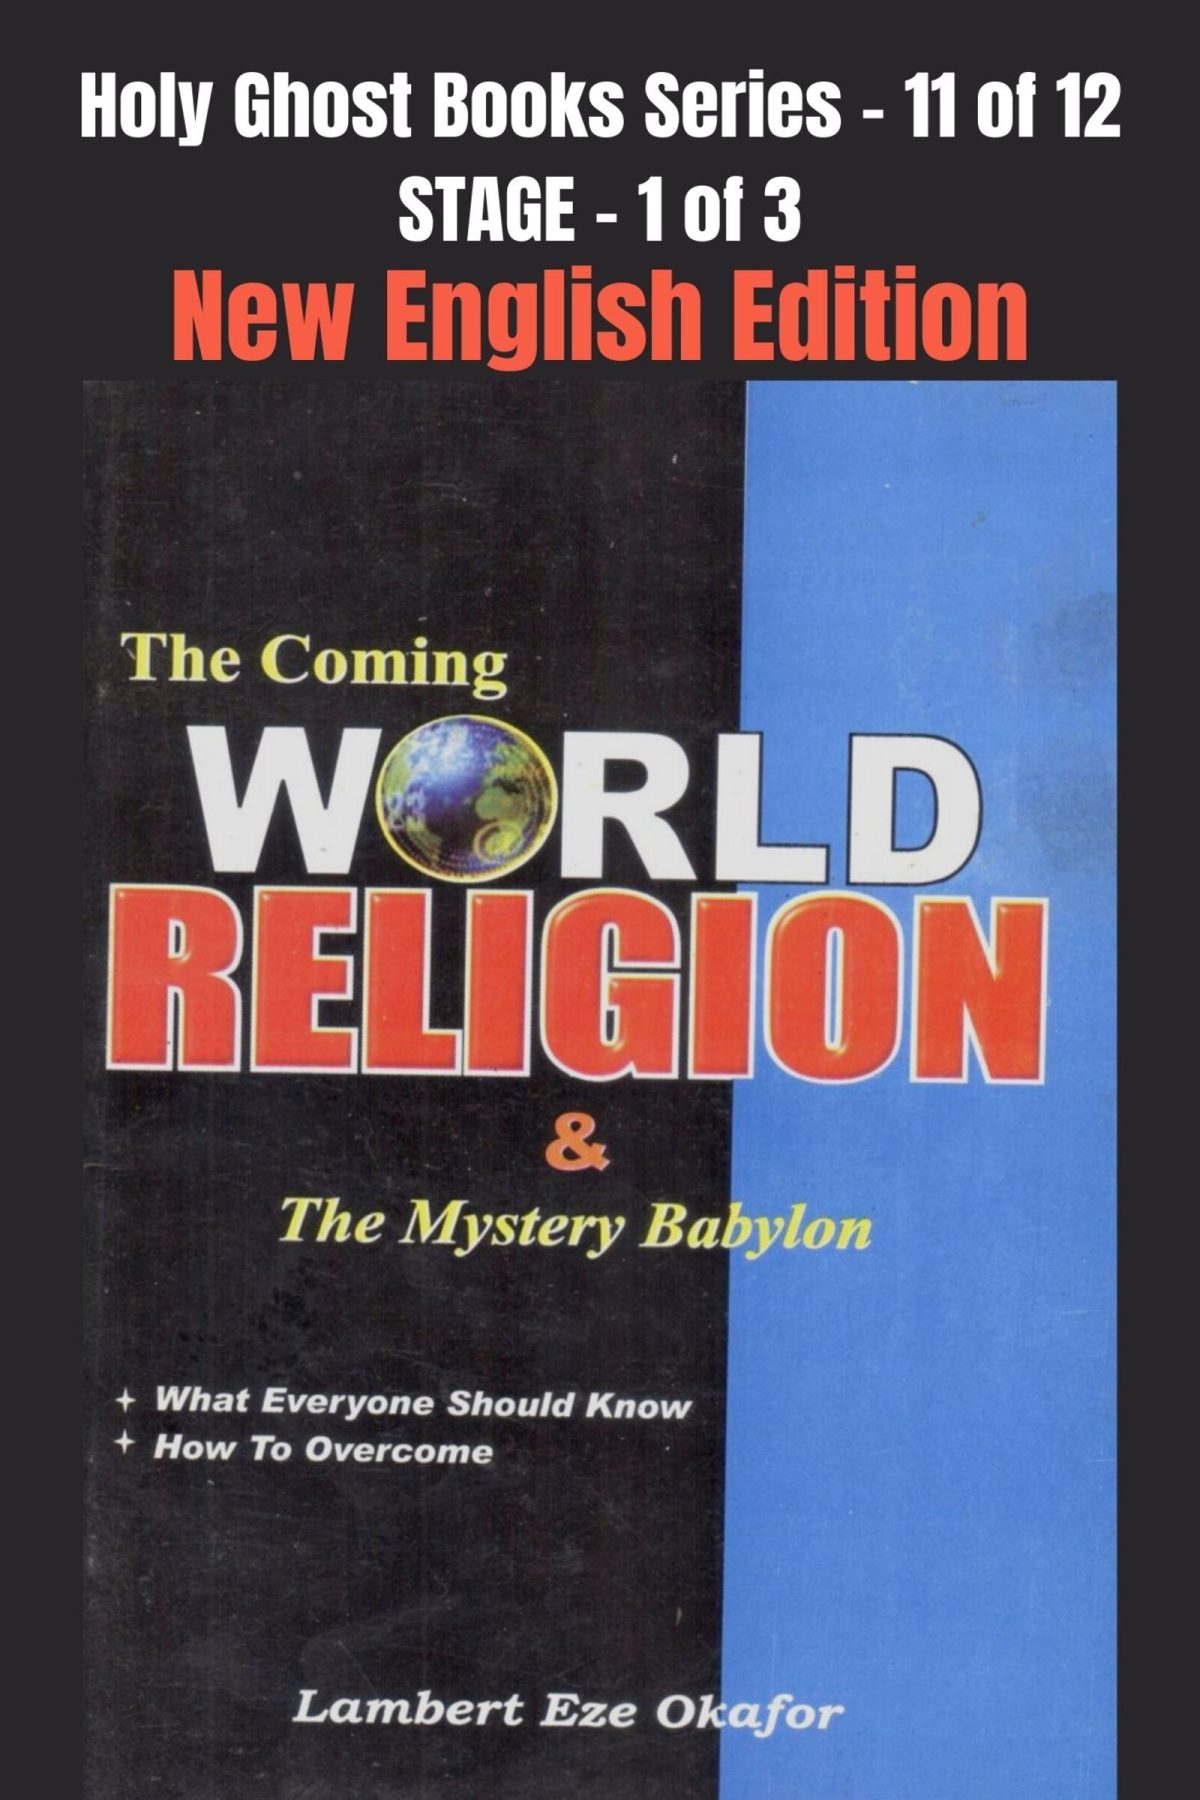 The coming world religion English